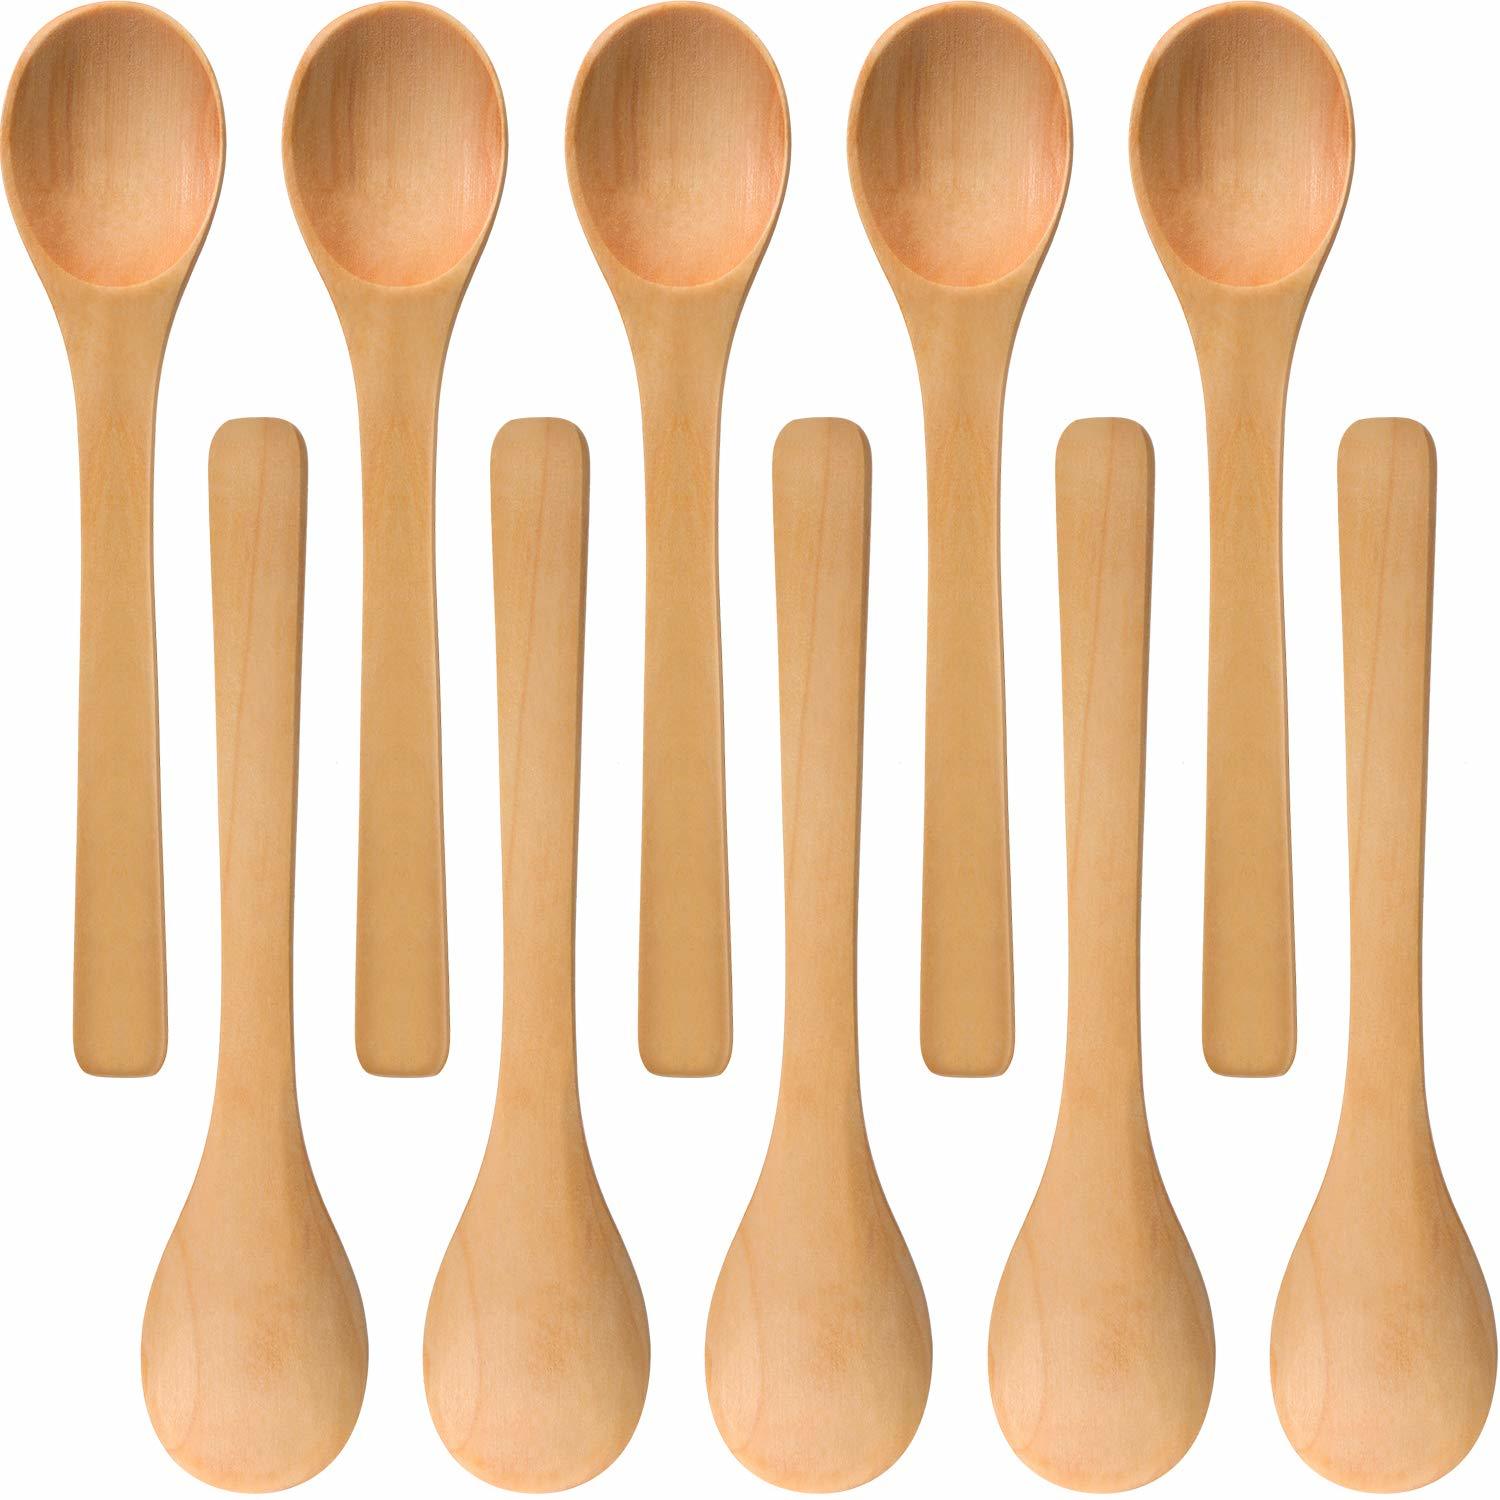 Primary image for 30 Pieces Mini Wooden Spoon Small Soup Spoons Serving Spoons Condiments Spoons W